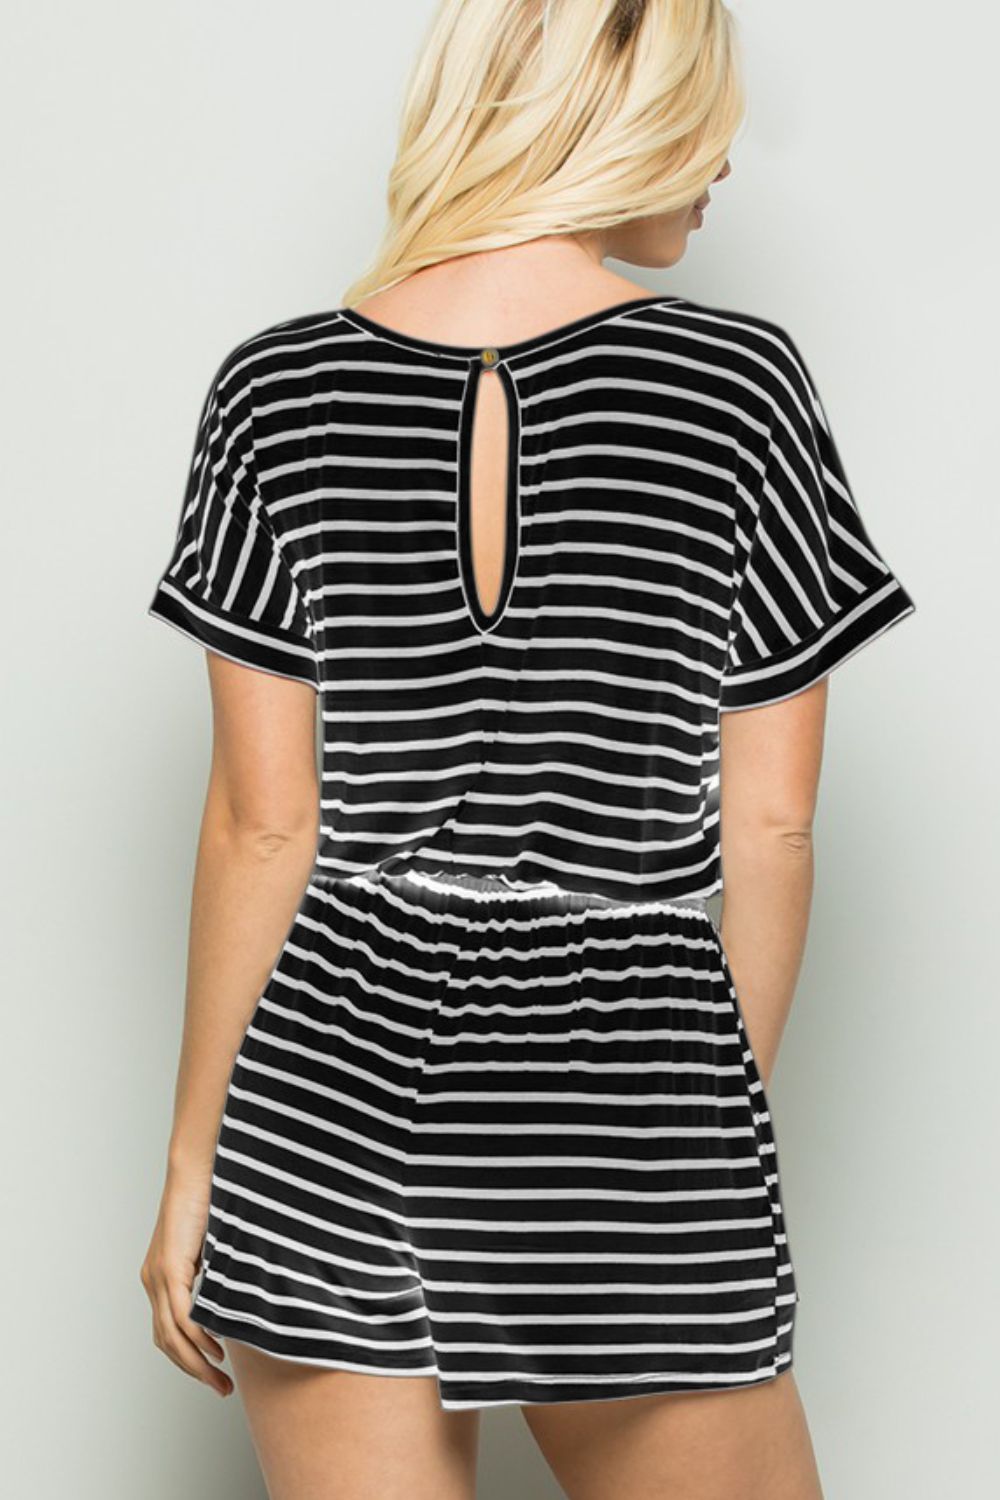 Heimish Full Size Striped Round Neck Short Sleeve Romper-Jumpsuits & Rompers-Inspired by Justeen-Women's Clothing Boutique in Chicago, Illinois